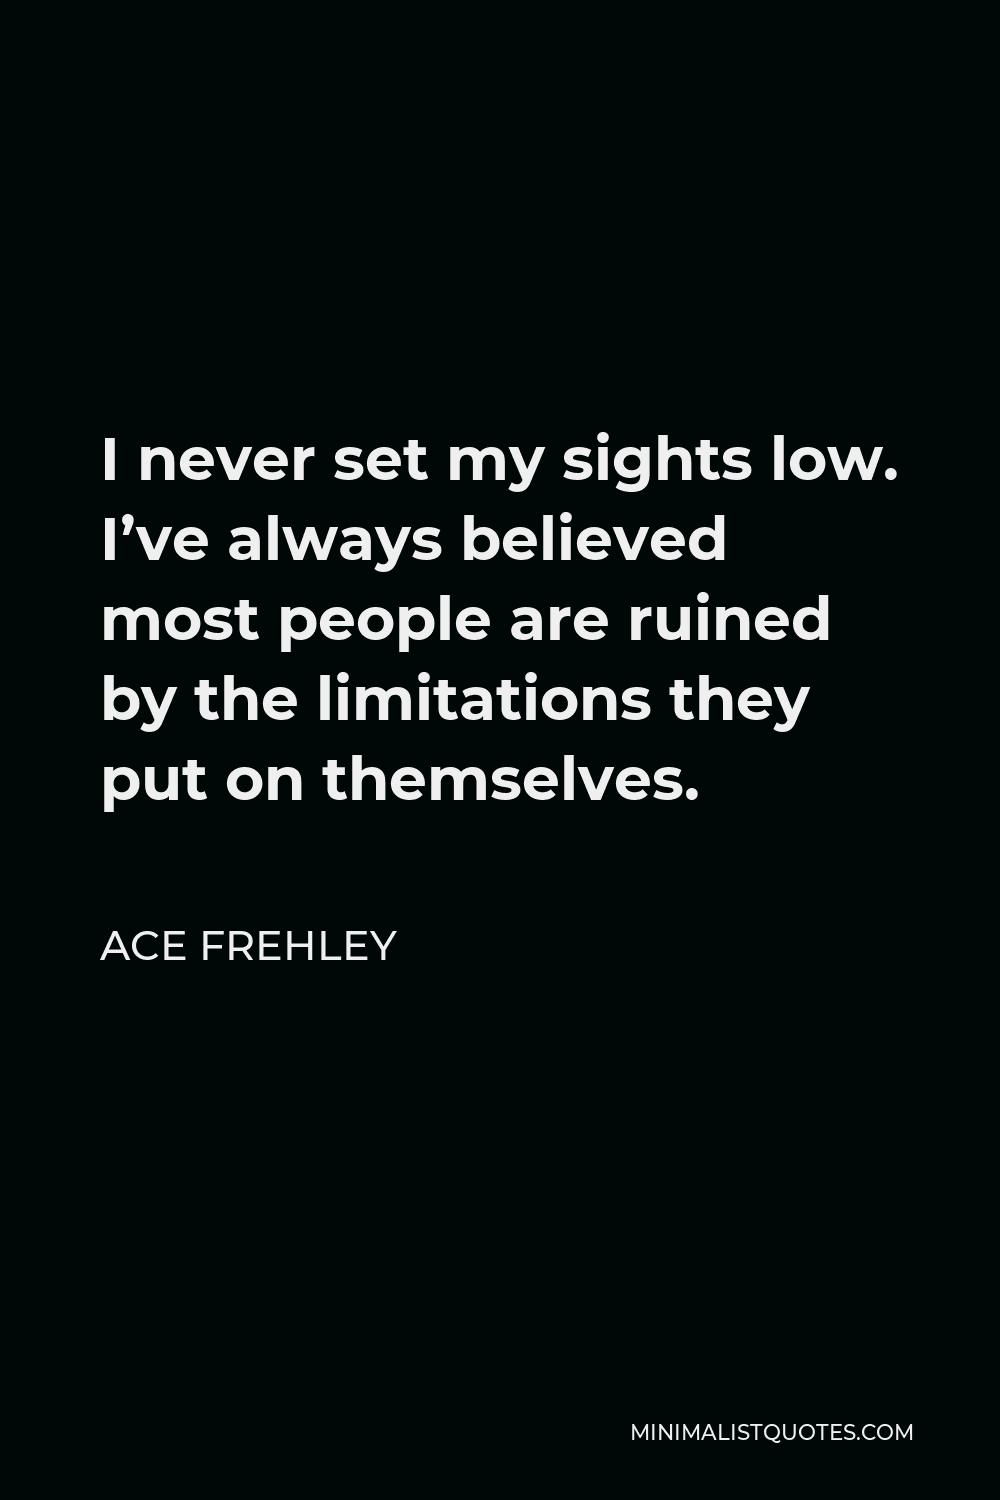 Ace Frehley Quote - I never set my sights low. I’ve always believed most people are ruined by the limitations they put on themselves.